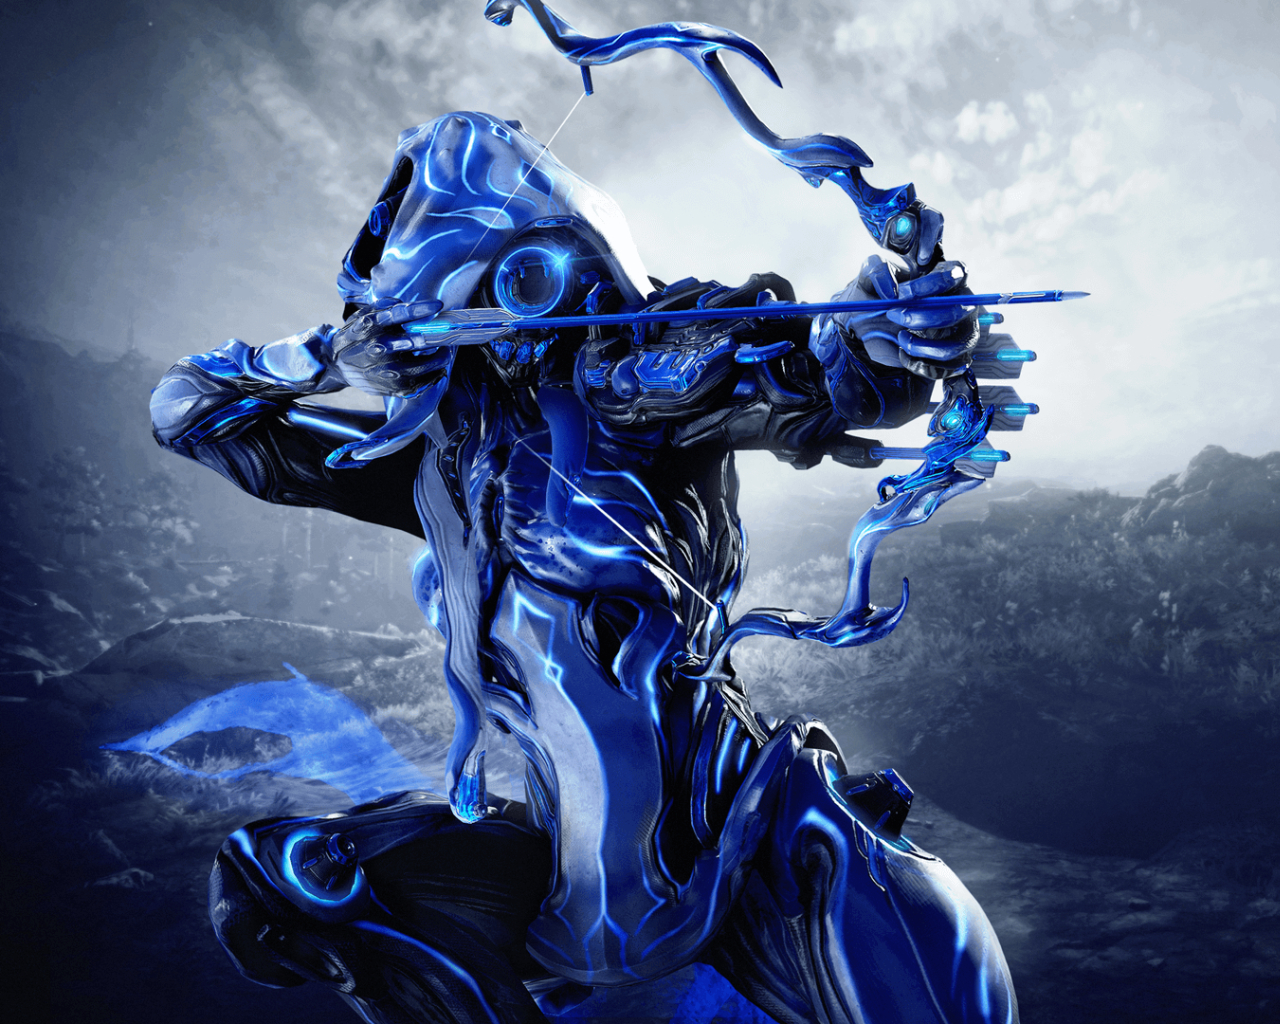 1280x1024 Warframe Hd Gaming New 21 1280x1024 Resolution Wallpaper Hd Games 4k Wallpapers Images Photos And Background Wallpapers Den